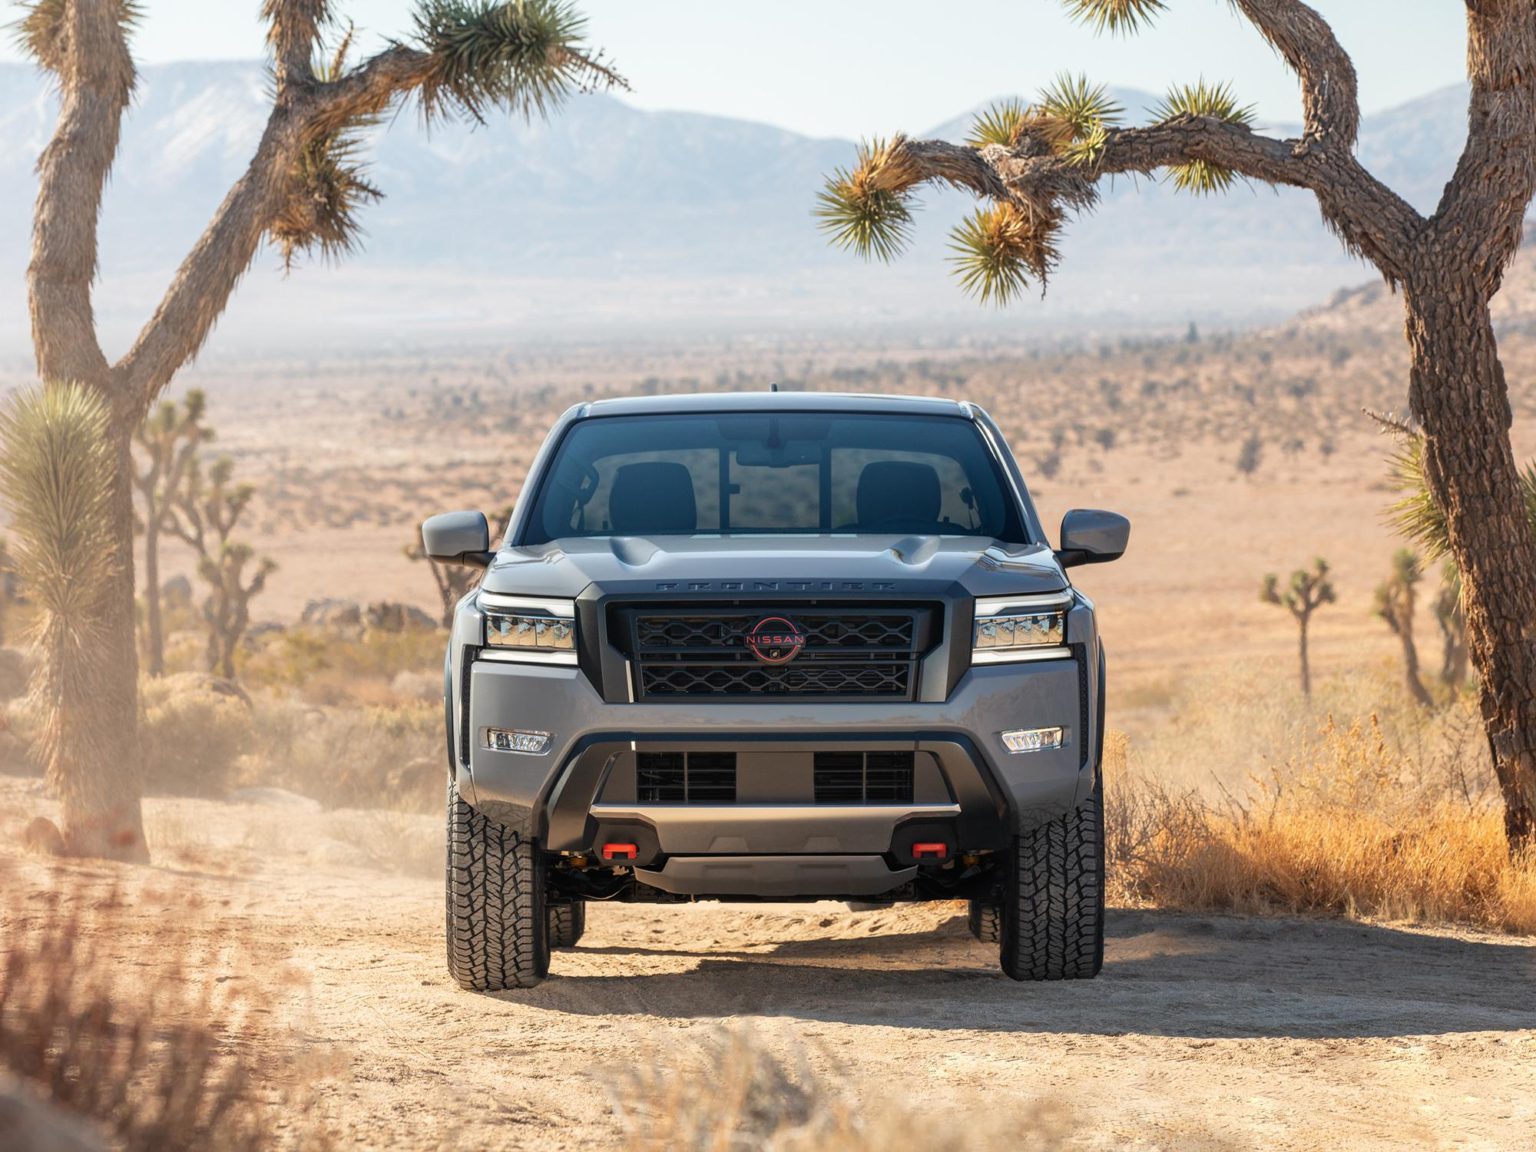 Nissan revealed a redesigned Frontier in February. It goes on sale in the summer of 2021.